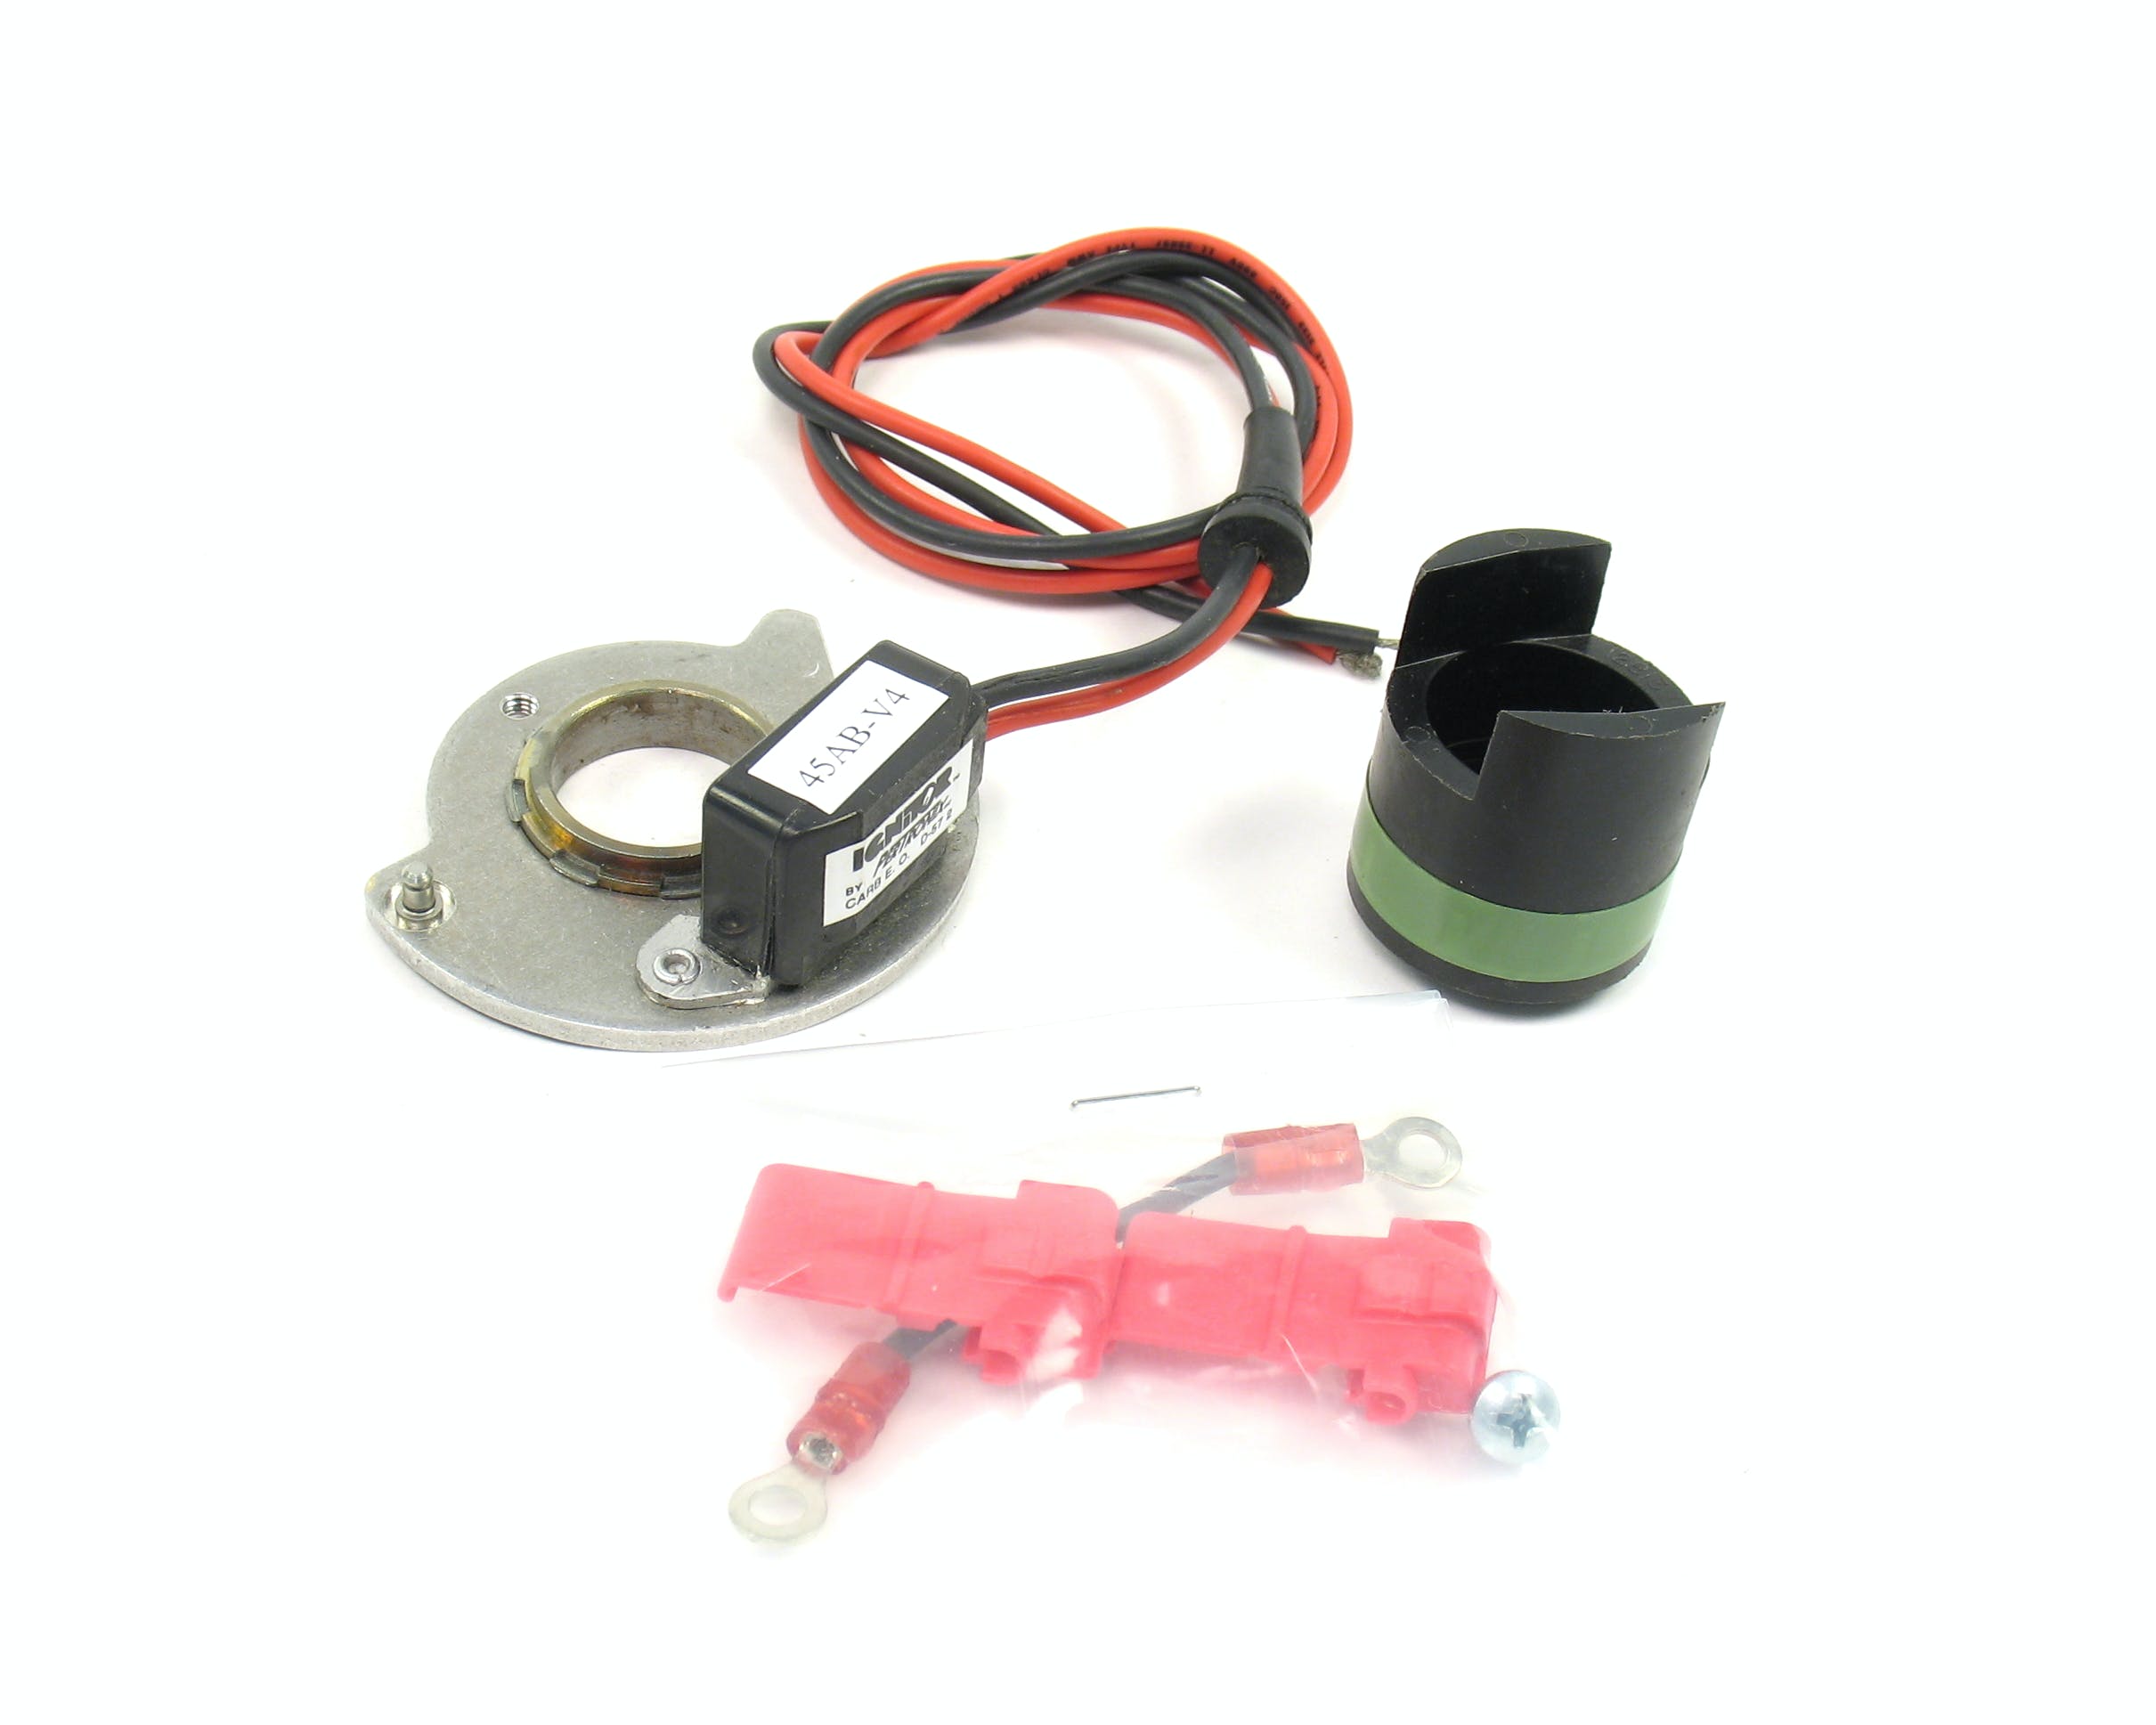 PerTronix FO-181 PerTronix FO-181 Ignitor Ford Electronic Distributor 8 cyl